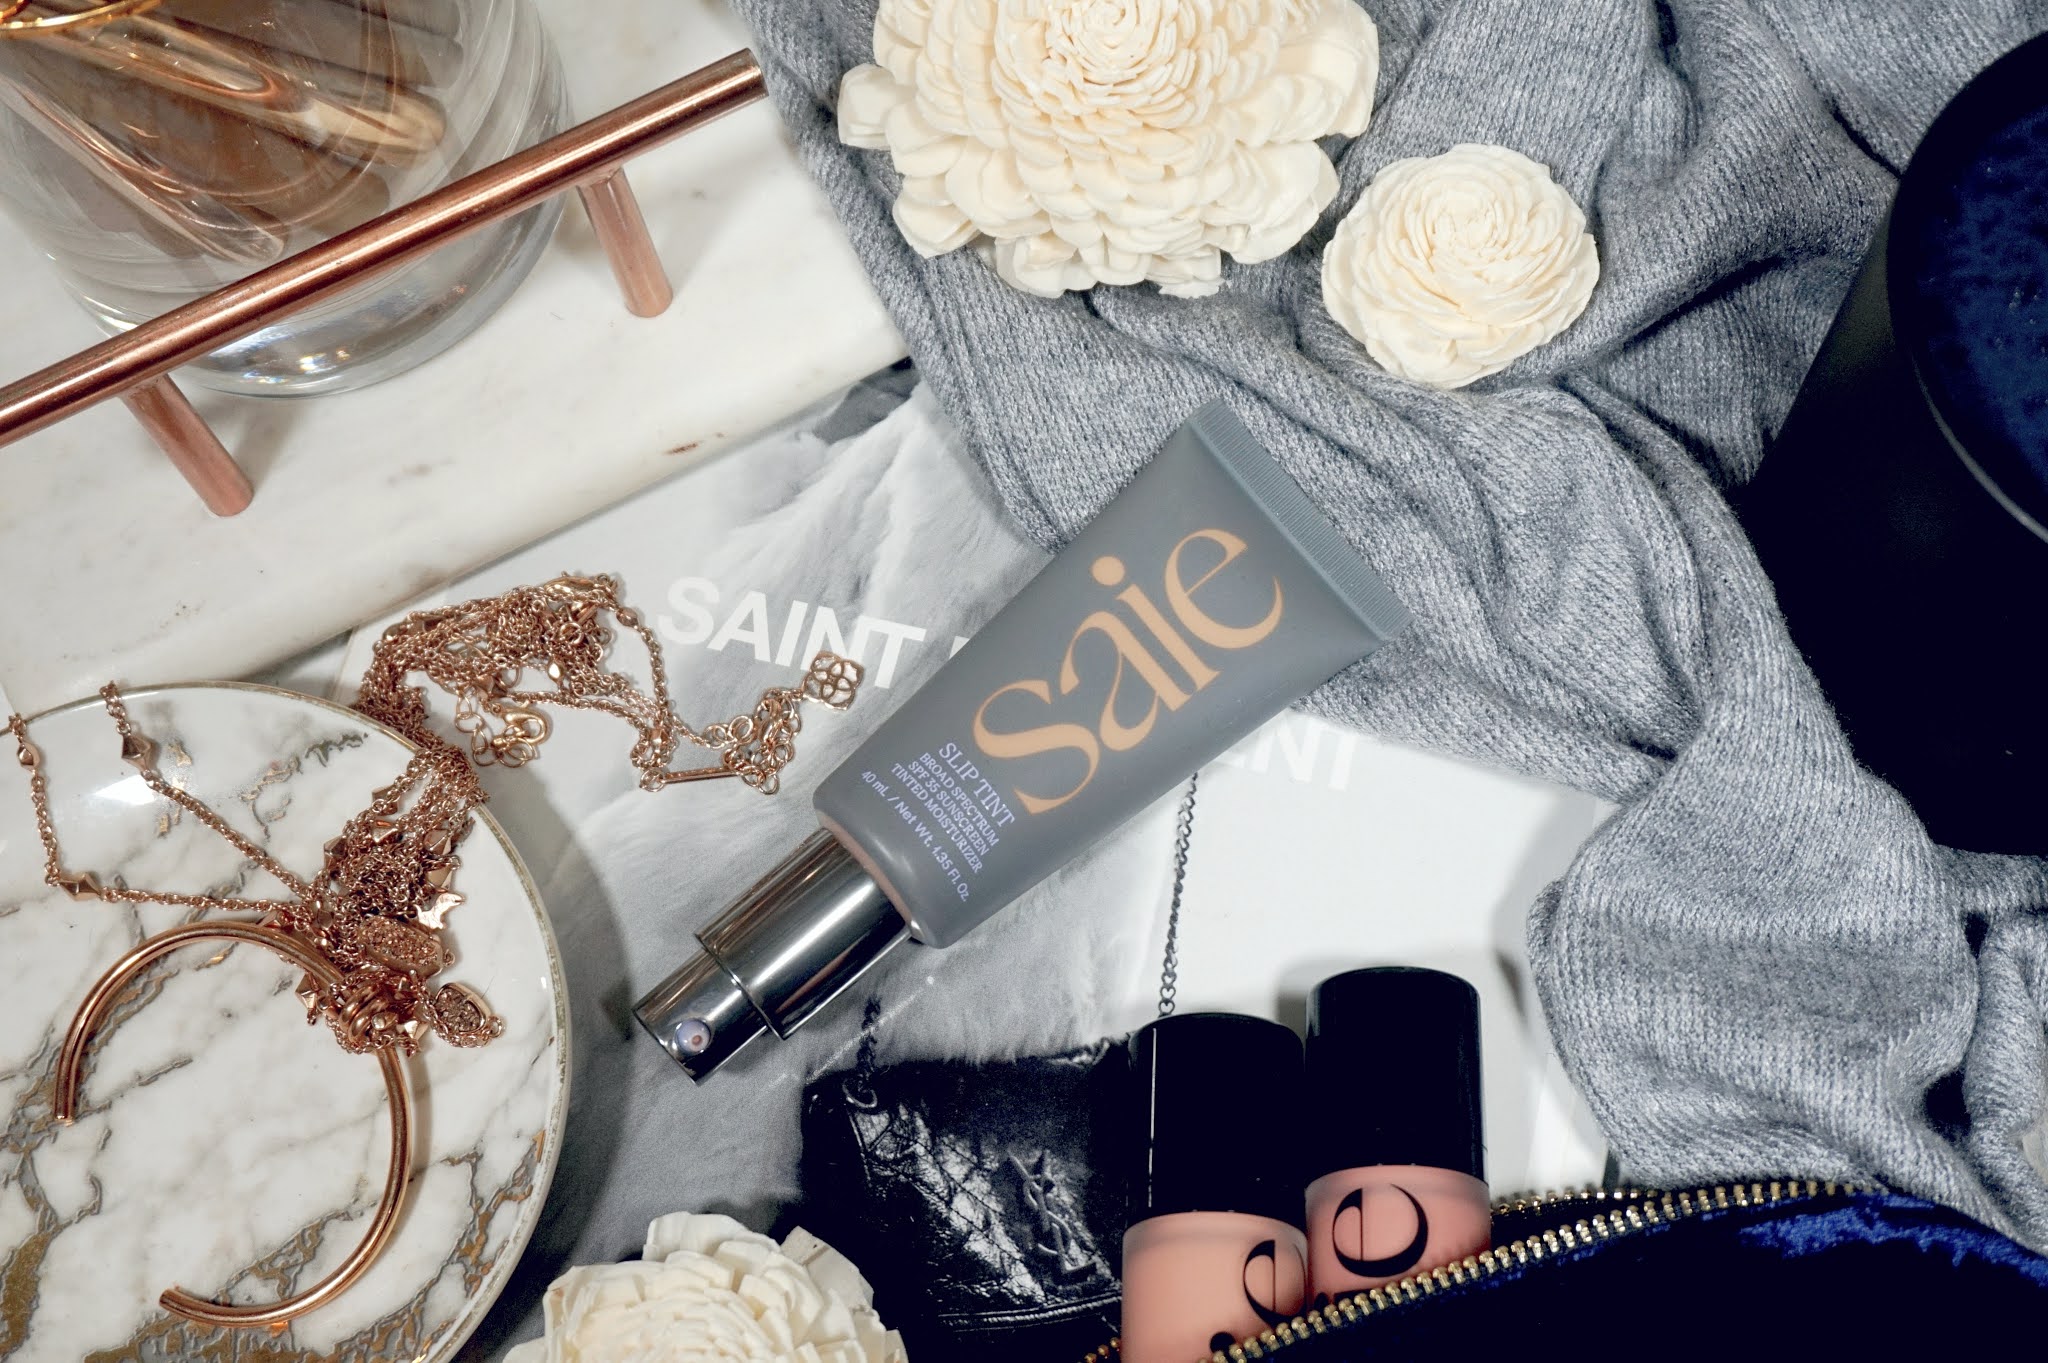 Saie Slip Tint Dewy Tinted Moisturizer SPF 35 Sunscreen Review and Swatches